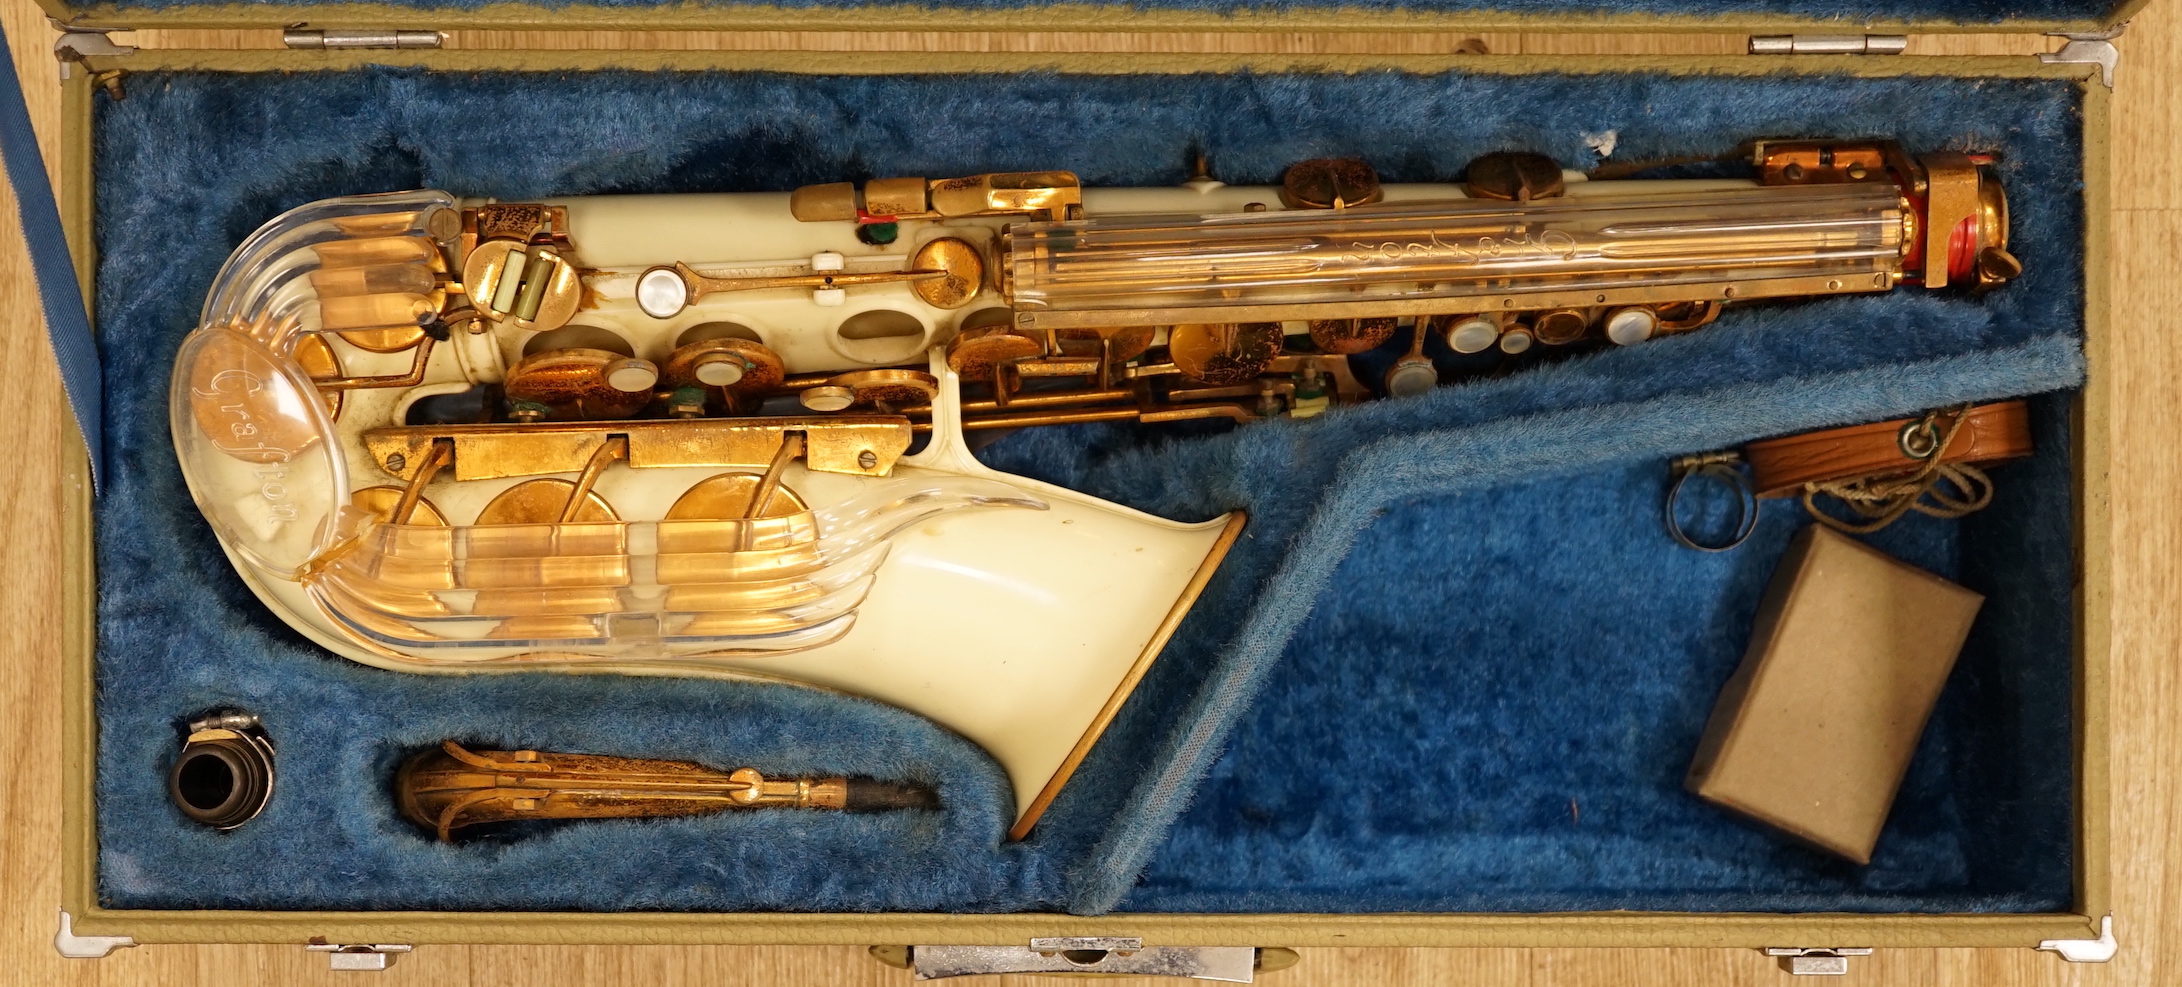 A cased Grafton alto saxophone with cream plastic body and brass plated key work, serial number 13597